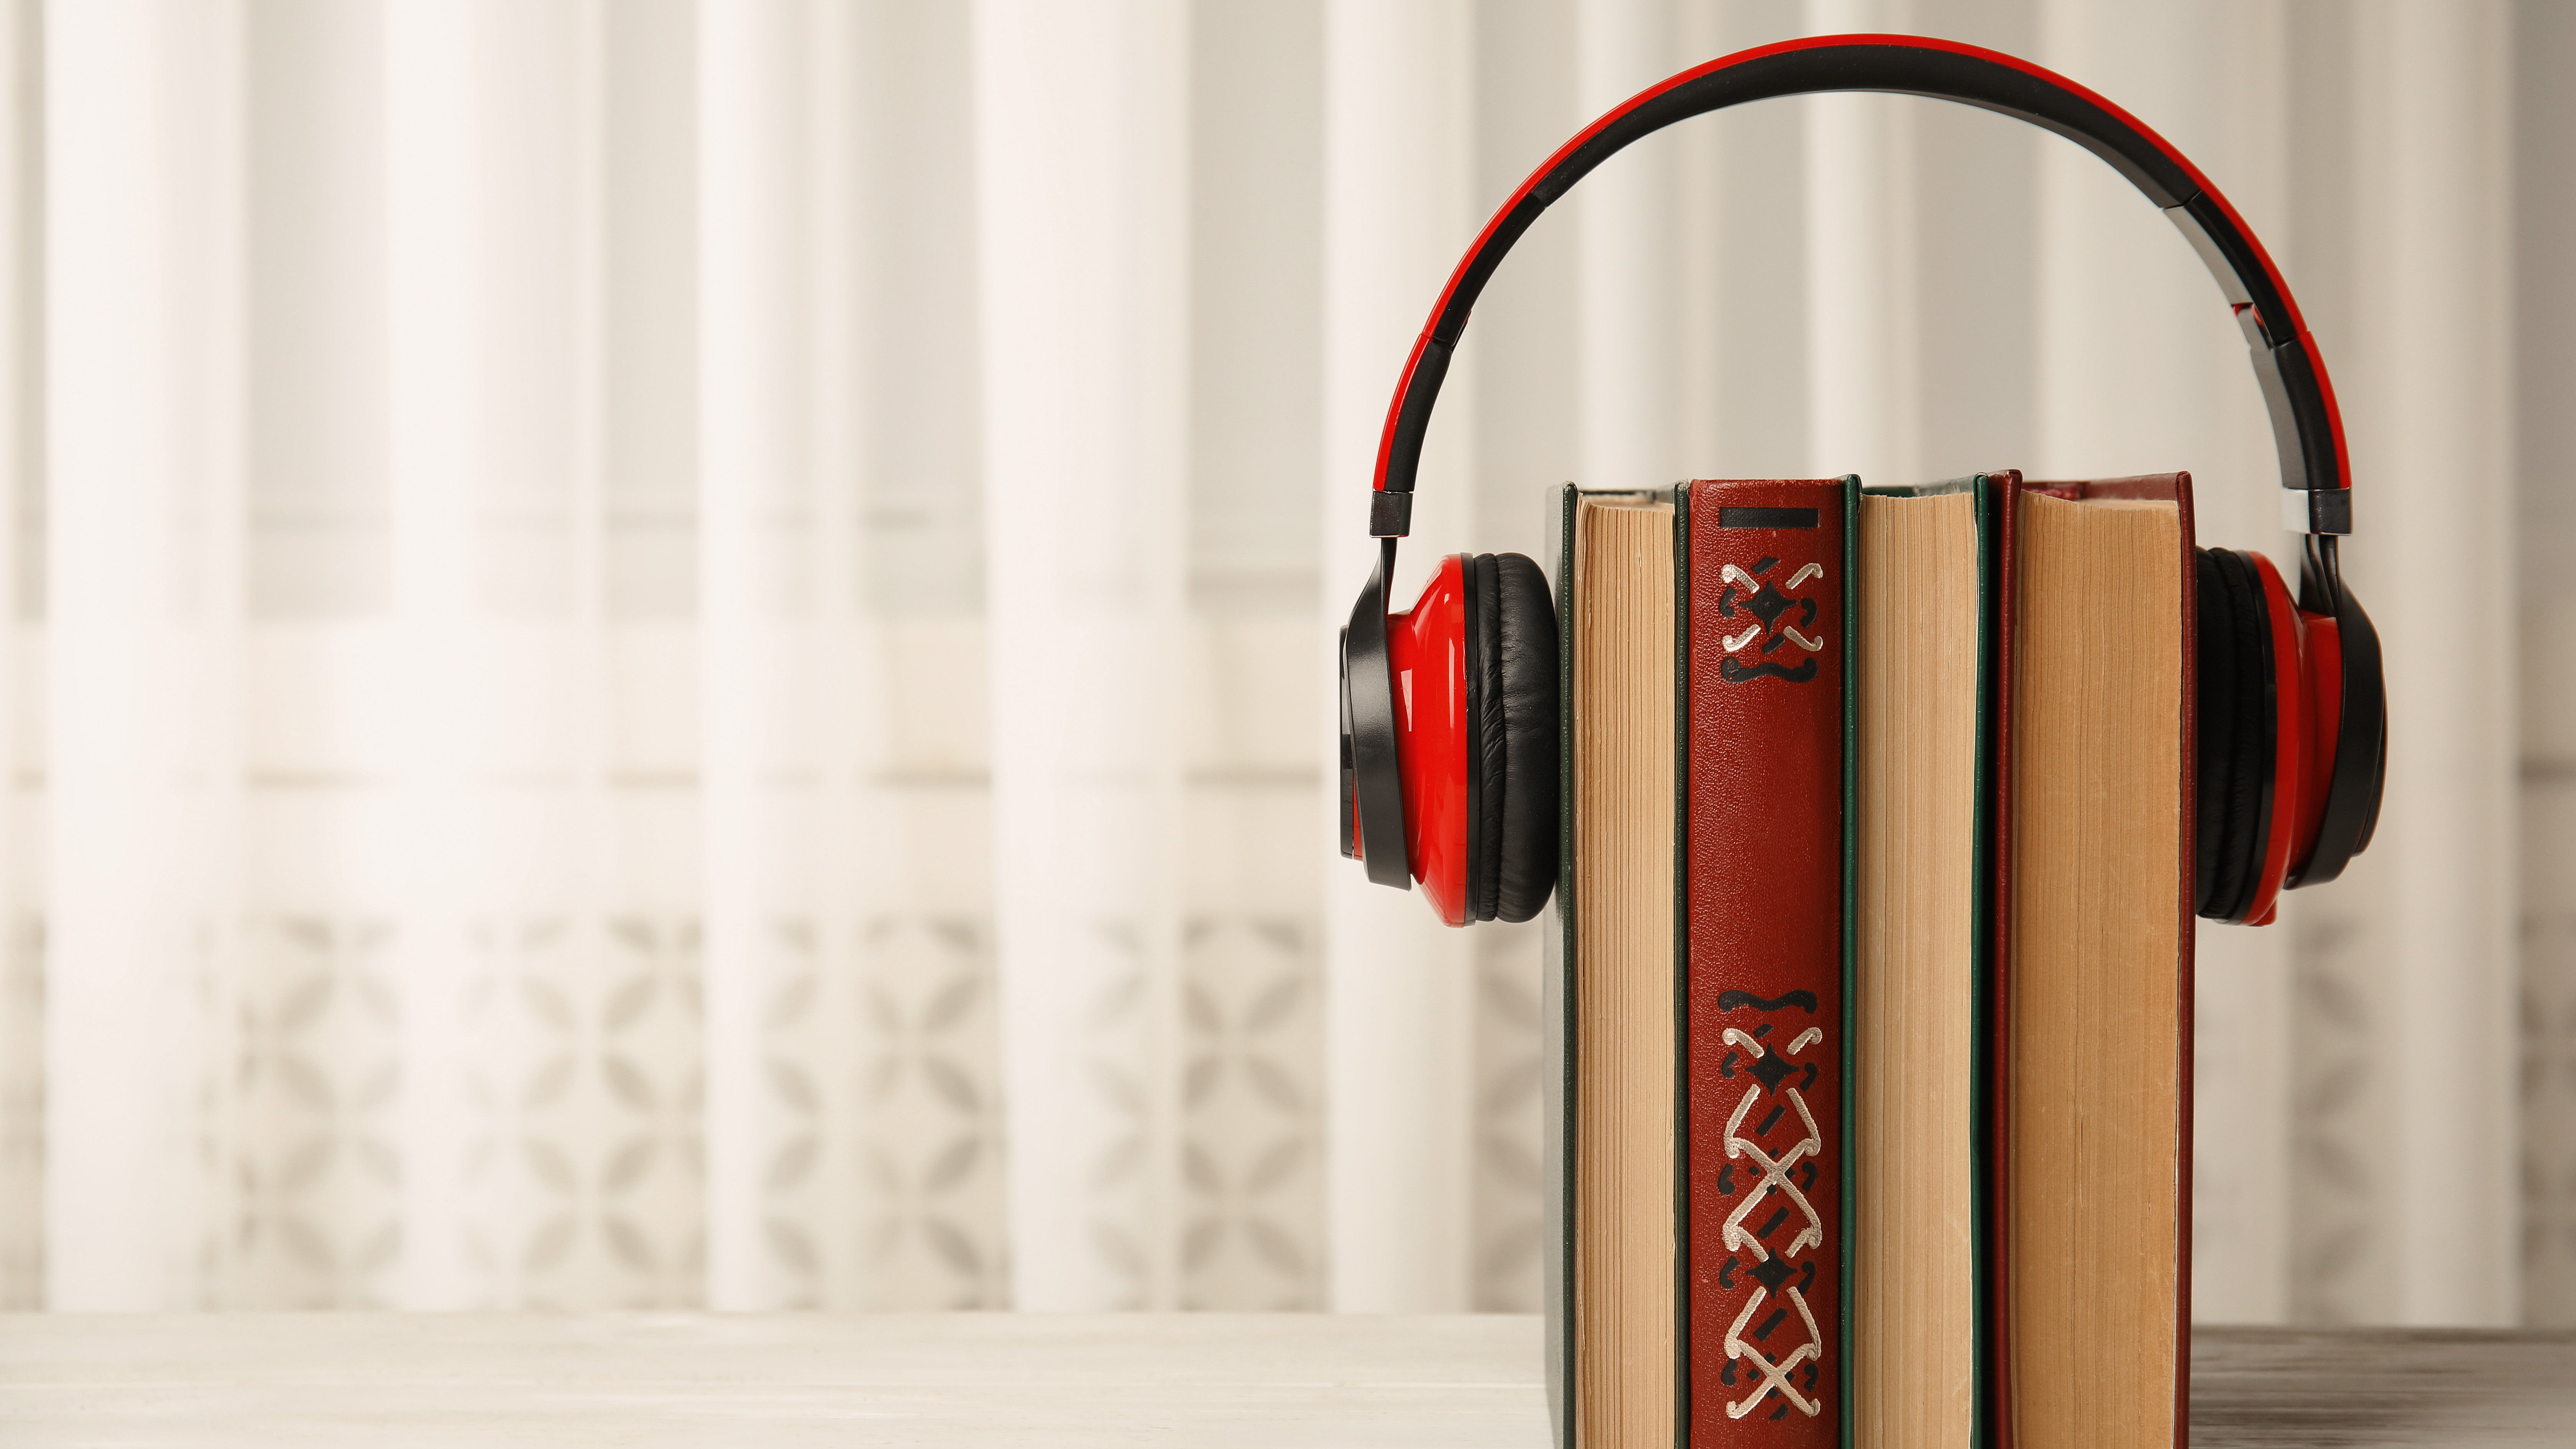 How To Listen To Library Audiobooks On Sonos